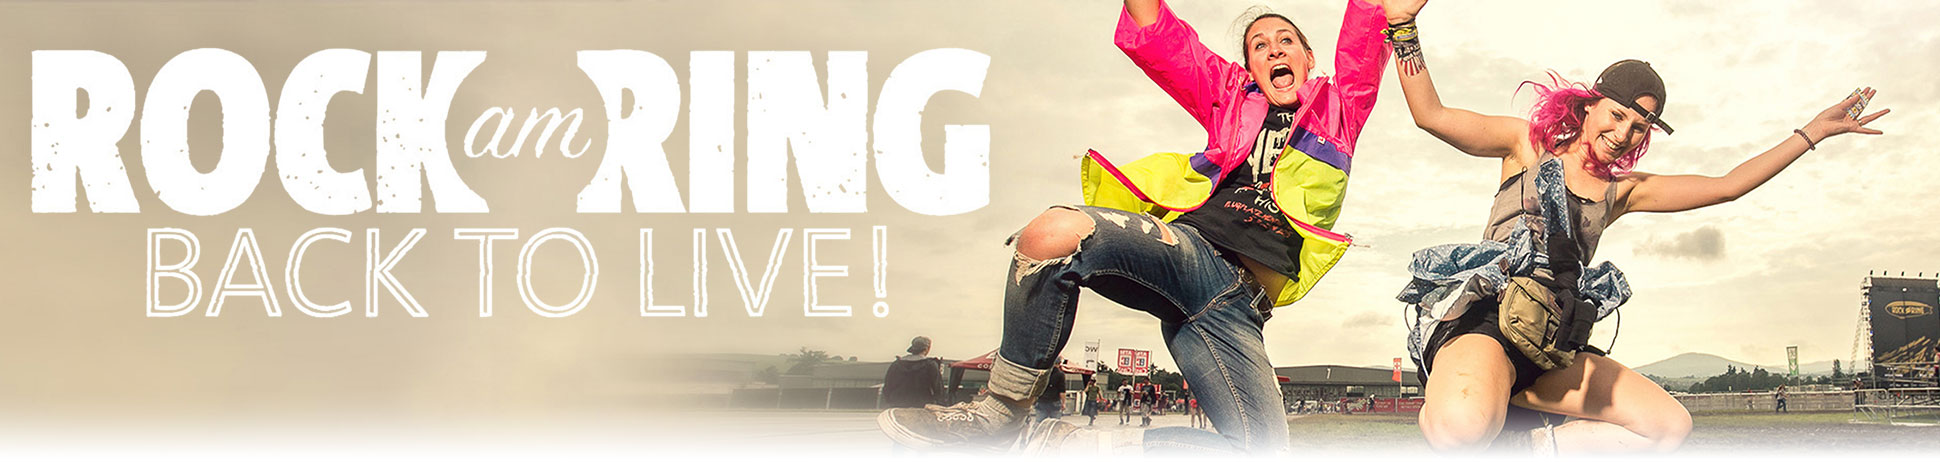 Rock am Ring - back to life!